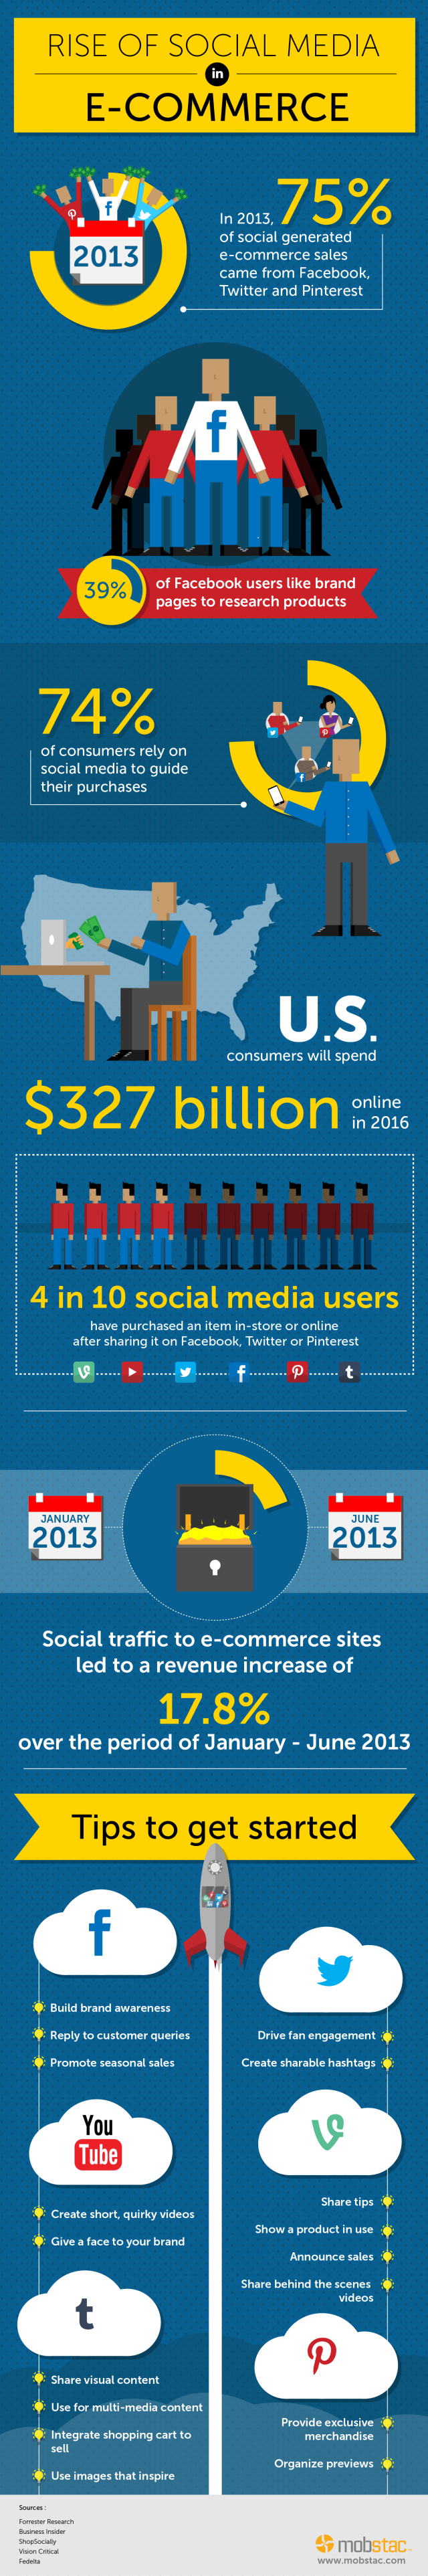 rise-of-social-media-in-ecommerce-mobstac-infographic